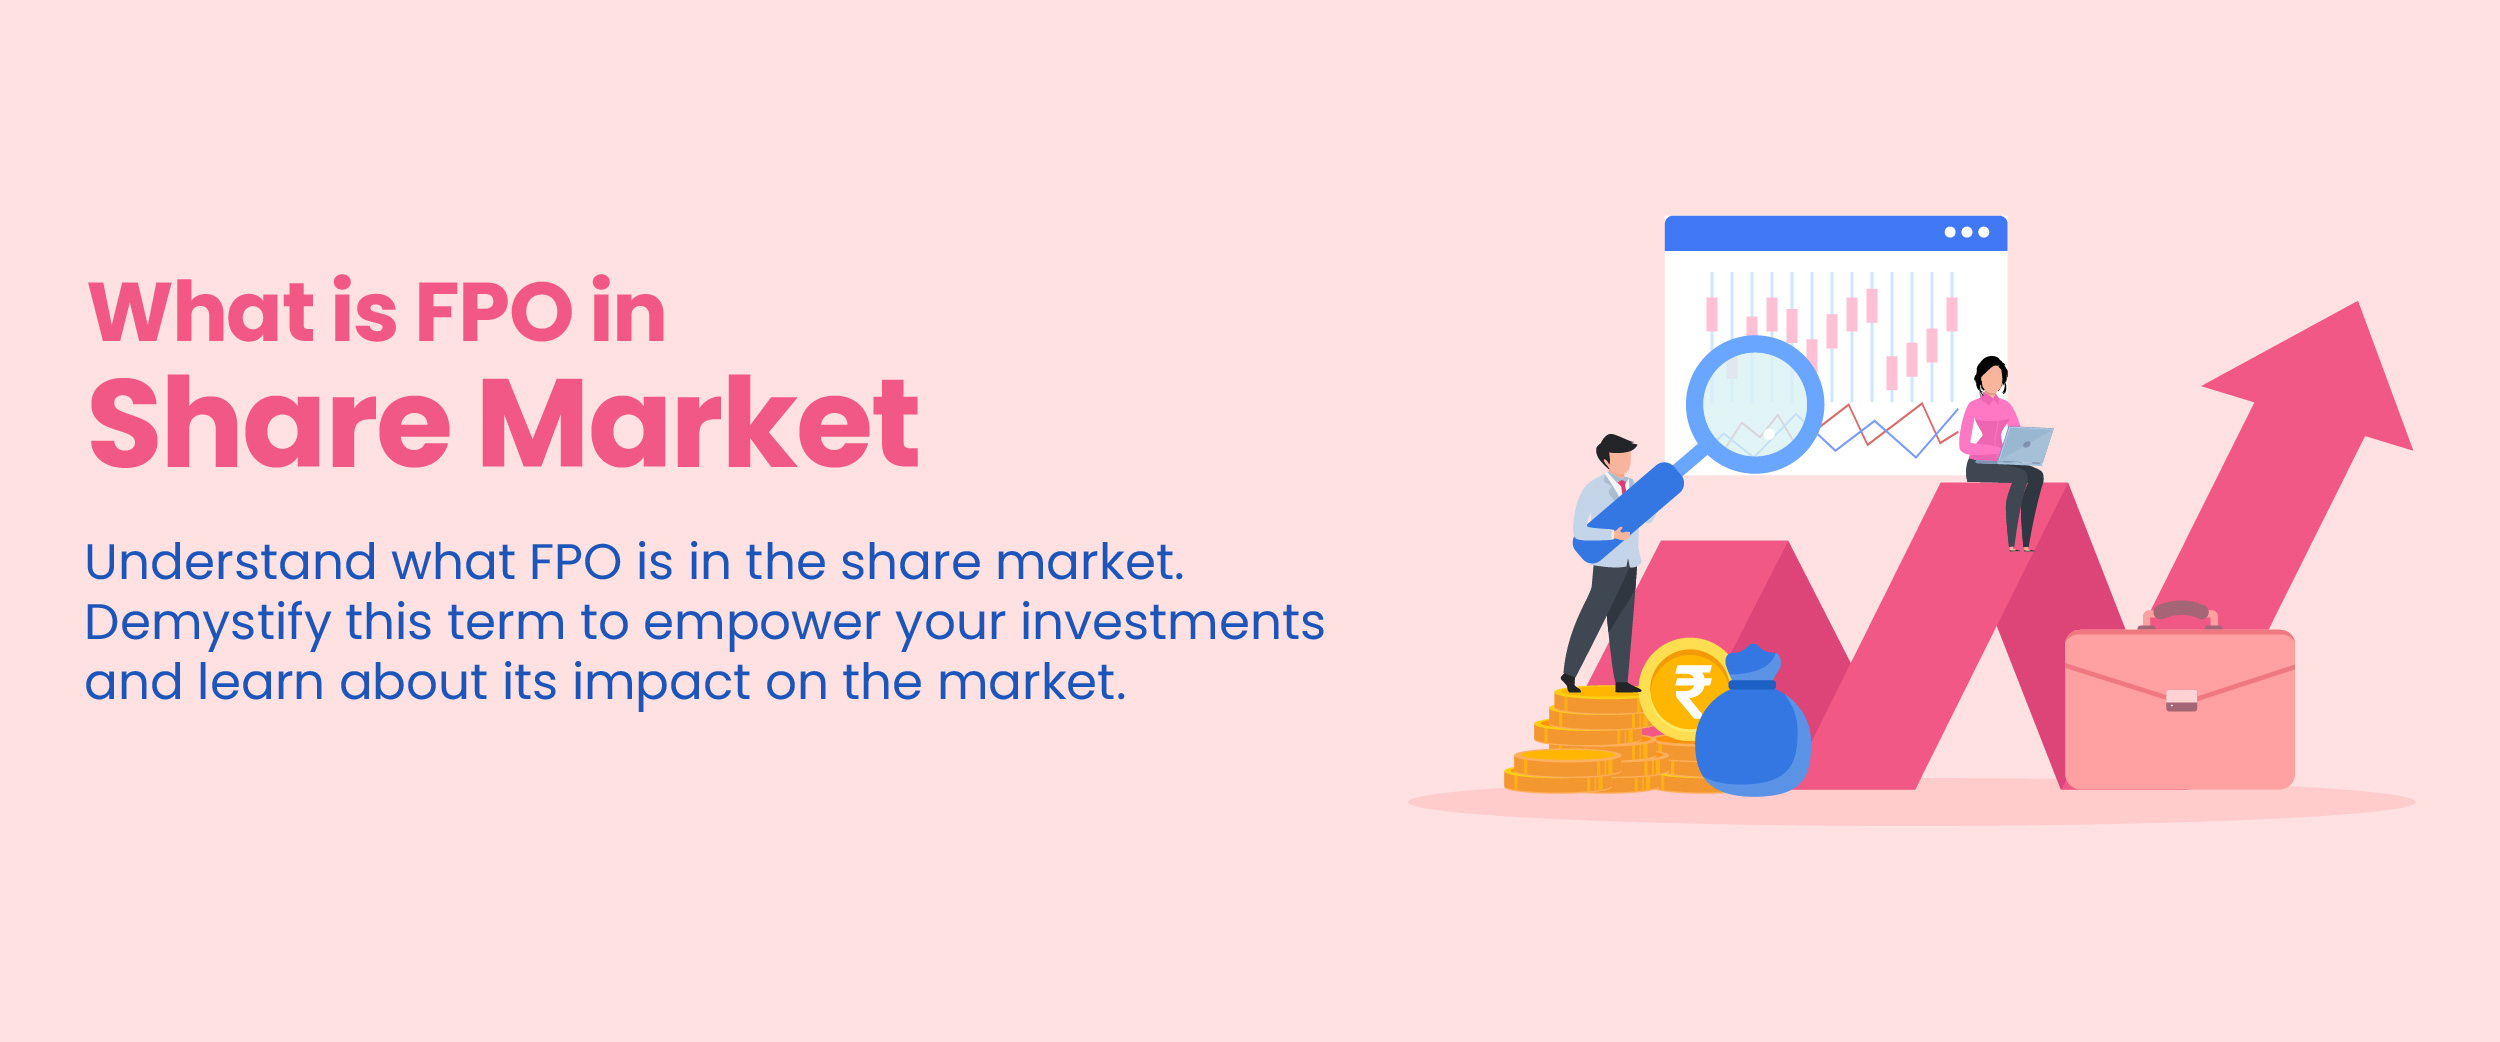 What is FPO in share market